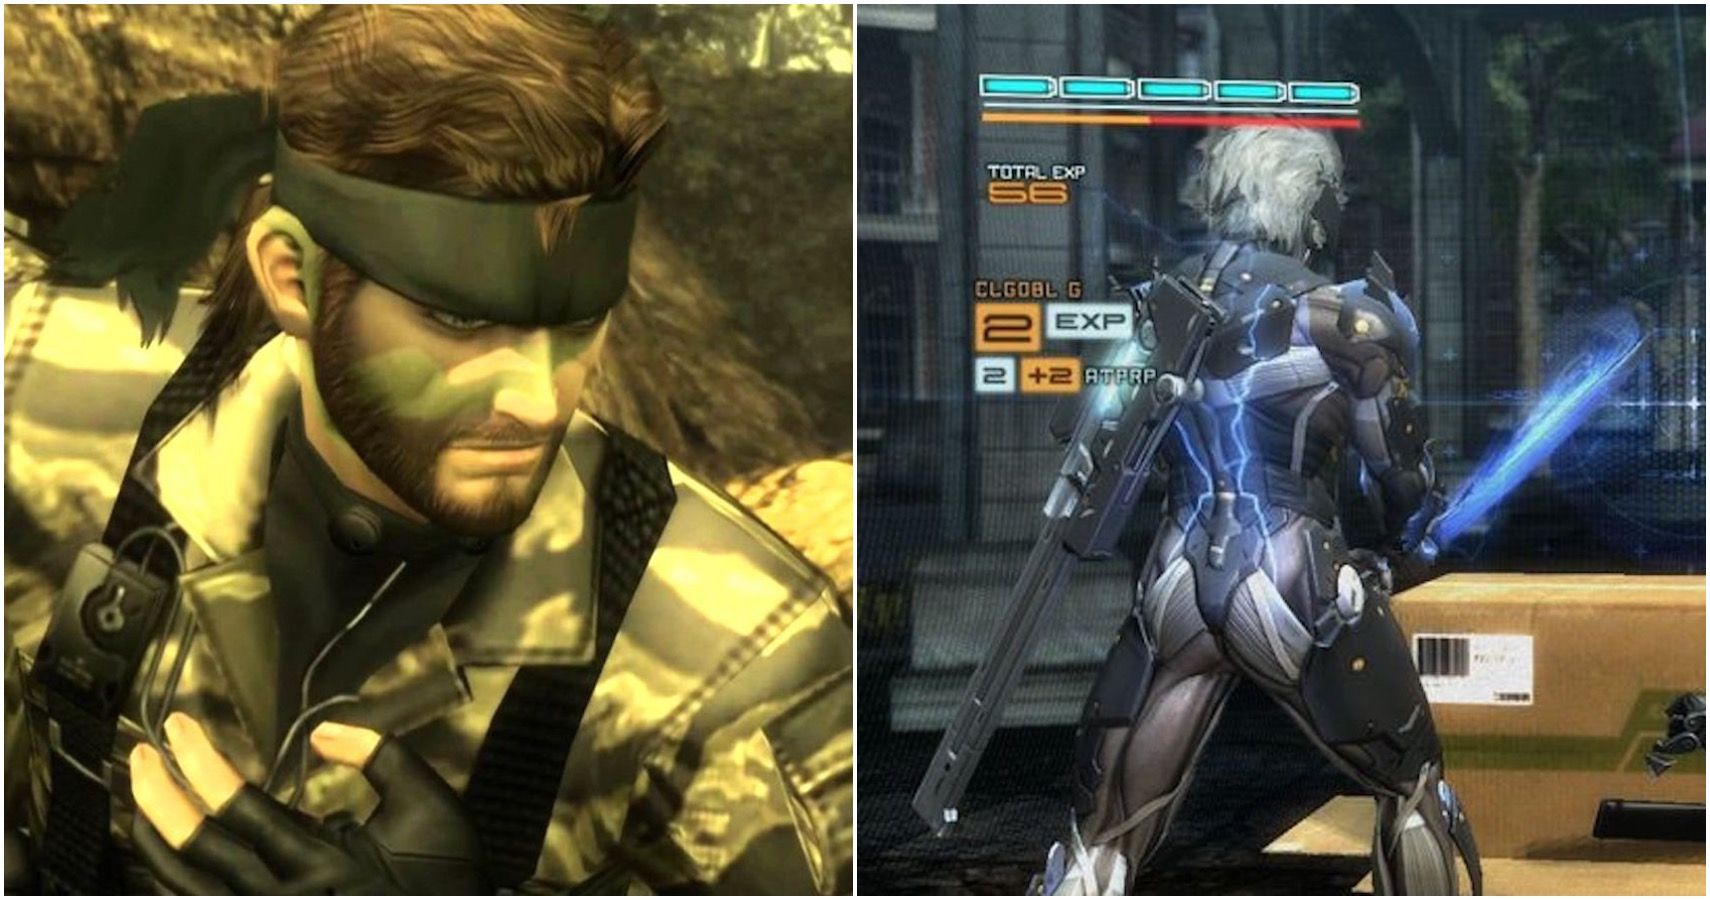 who made the metal gear rising ost